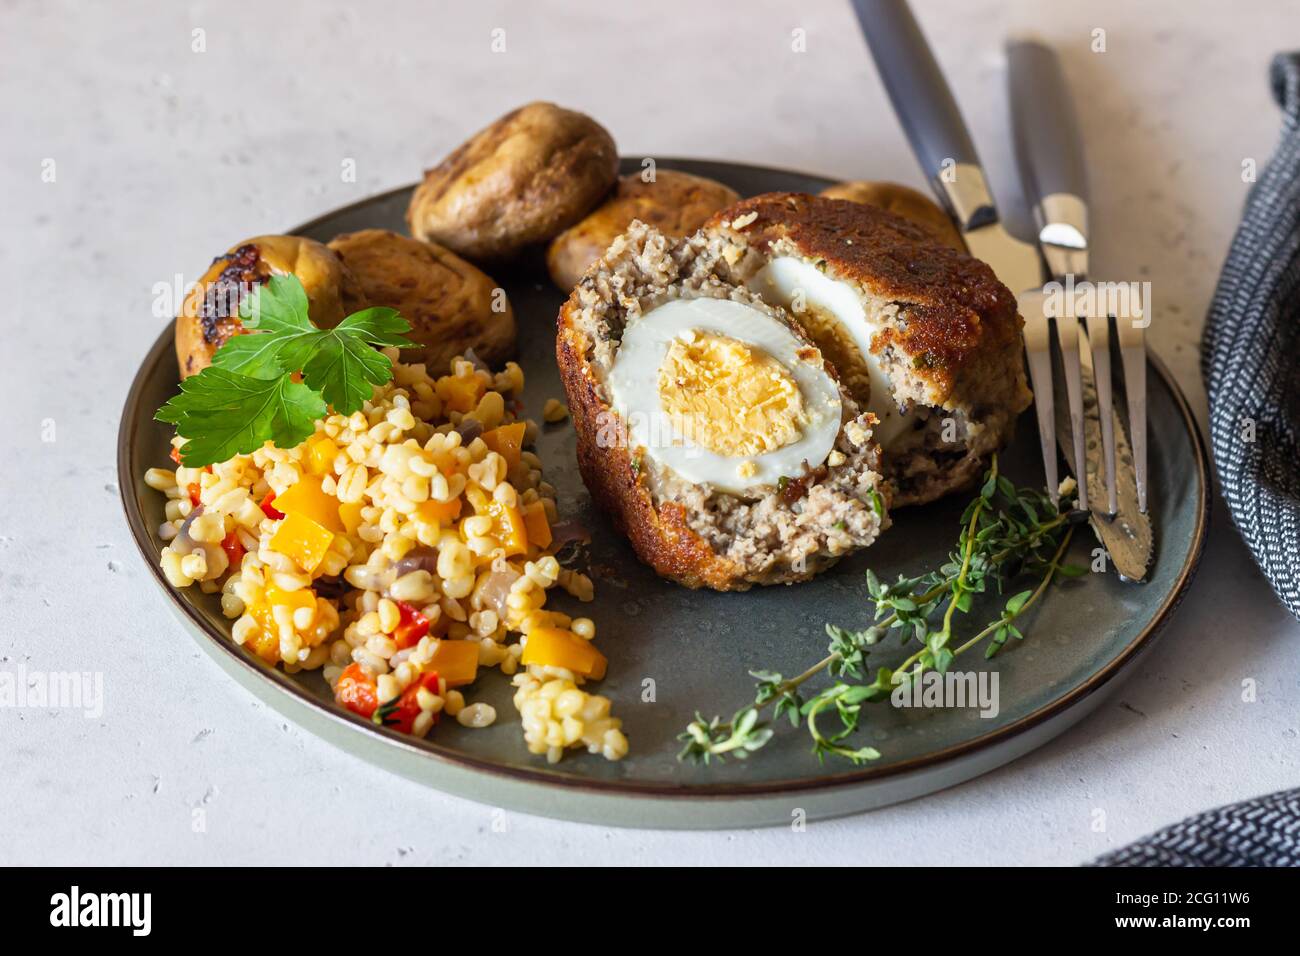 Homemade scotch eggs on a ceramic plate served with bulgur pilaf, grilled mushroom and herbs. Meat cutlet with boiled egg. Traditional English cuisine Stock Photo